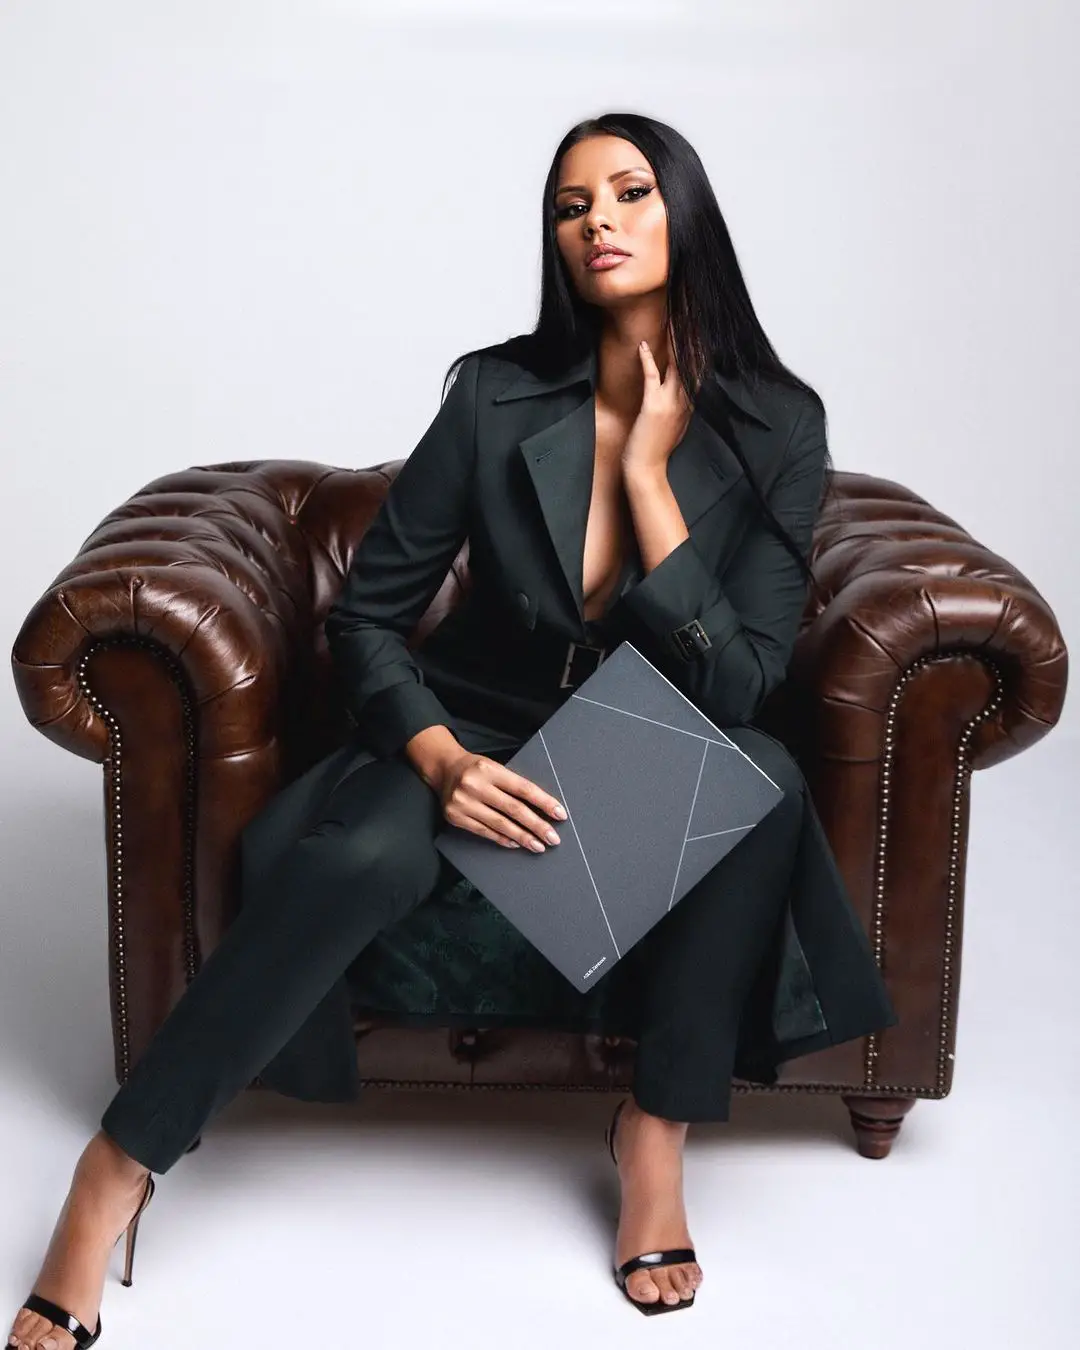 Tamaryn Green announced as guest judge on Miss SA’s “Crown Chasers” show